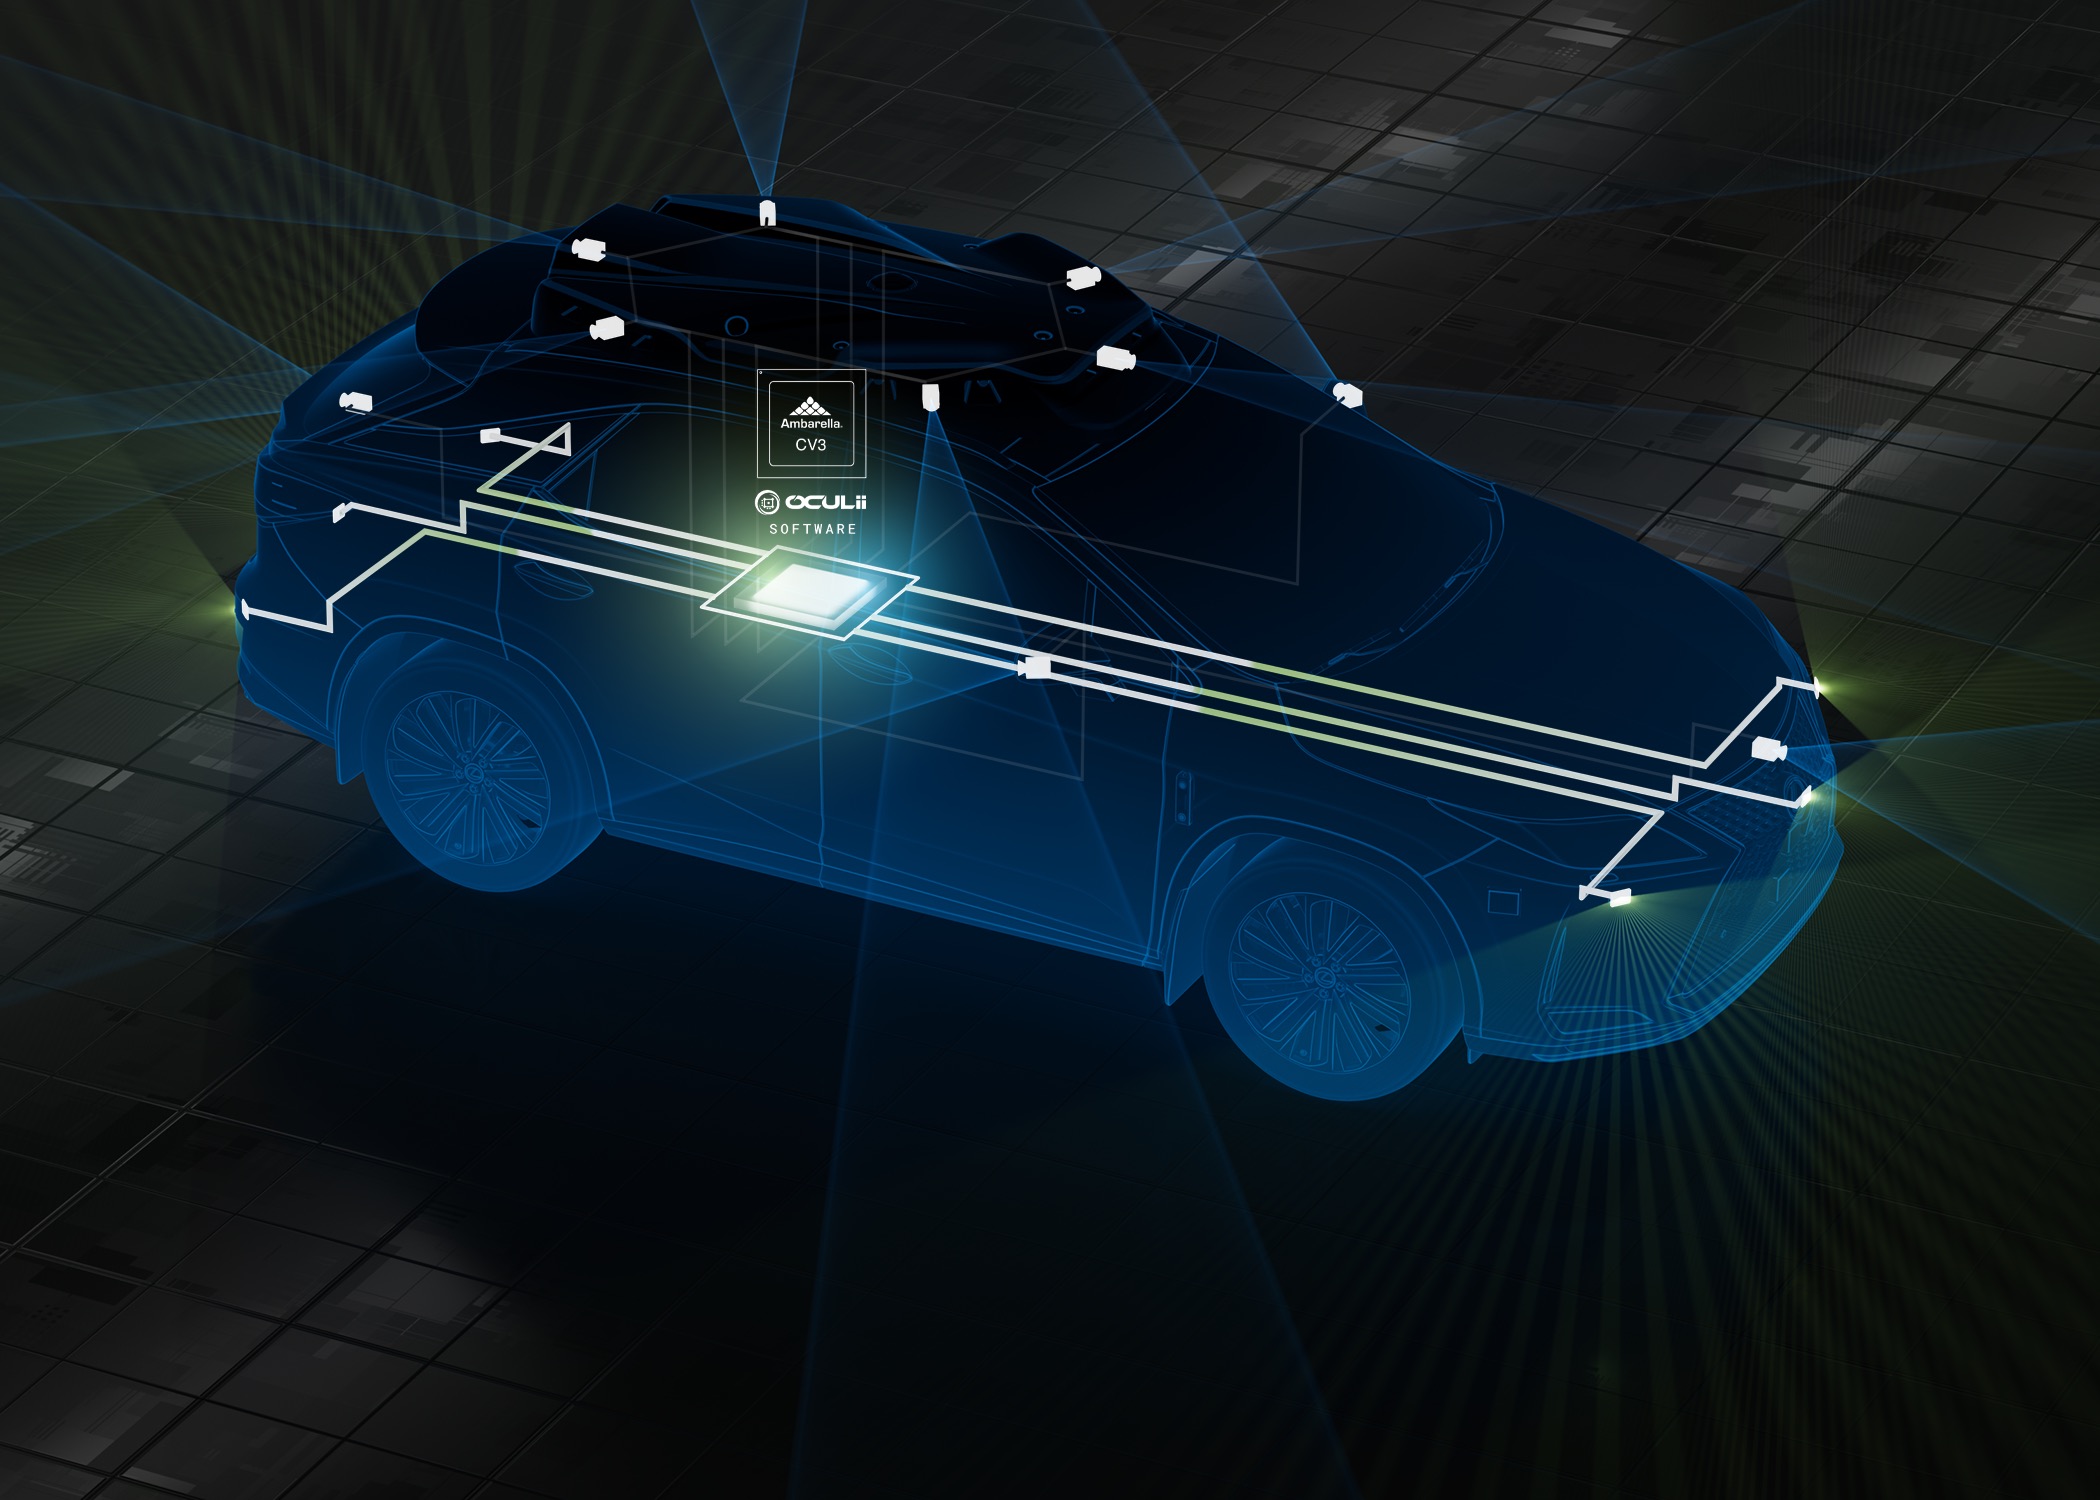 World's First Centrally Processed 4D Imaging Radar Architecture for Autonomous Mobility Systems